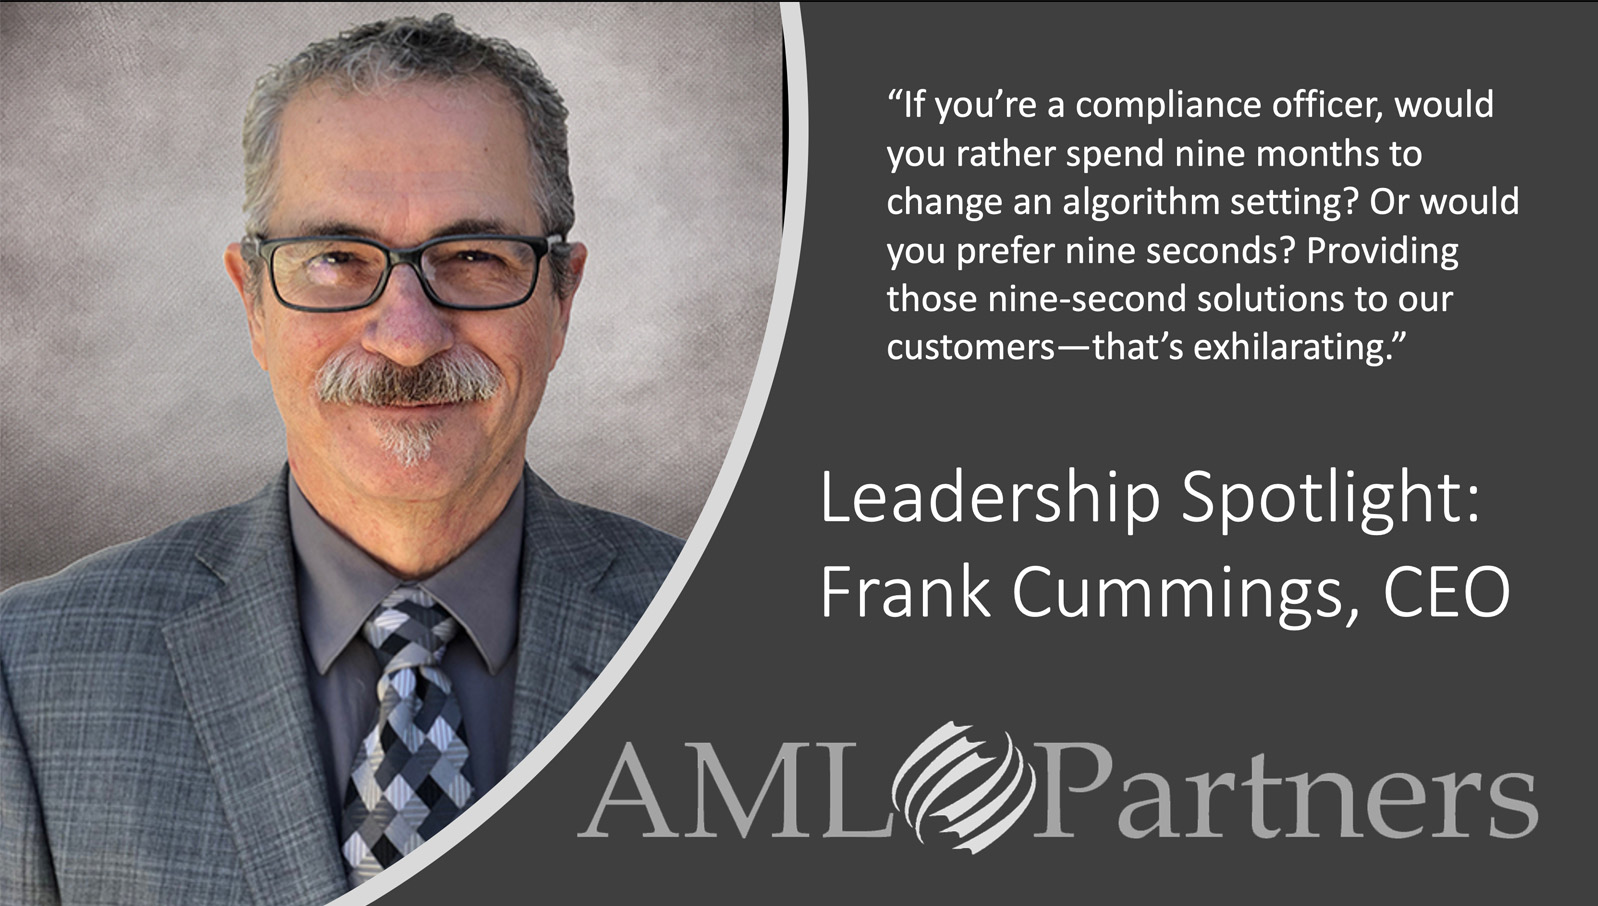 Portrait of Frank Cummings, CEO of AML Partners and a co-founder. Text: Leadership Spotlight, Frank Cummings, and a logo for the company.